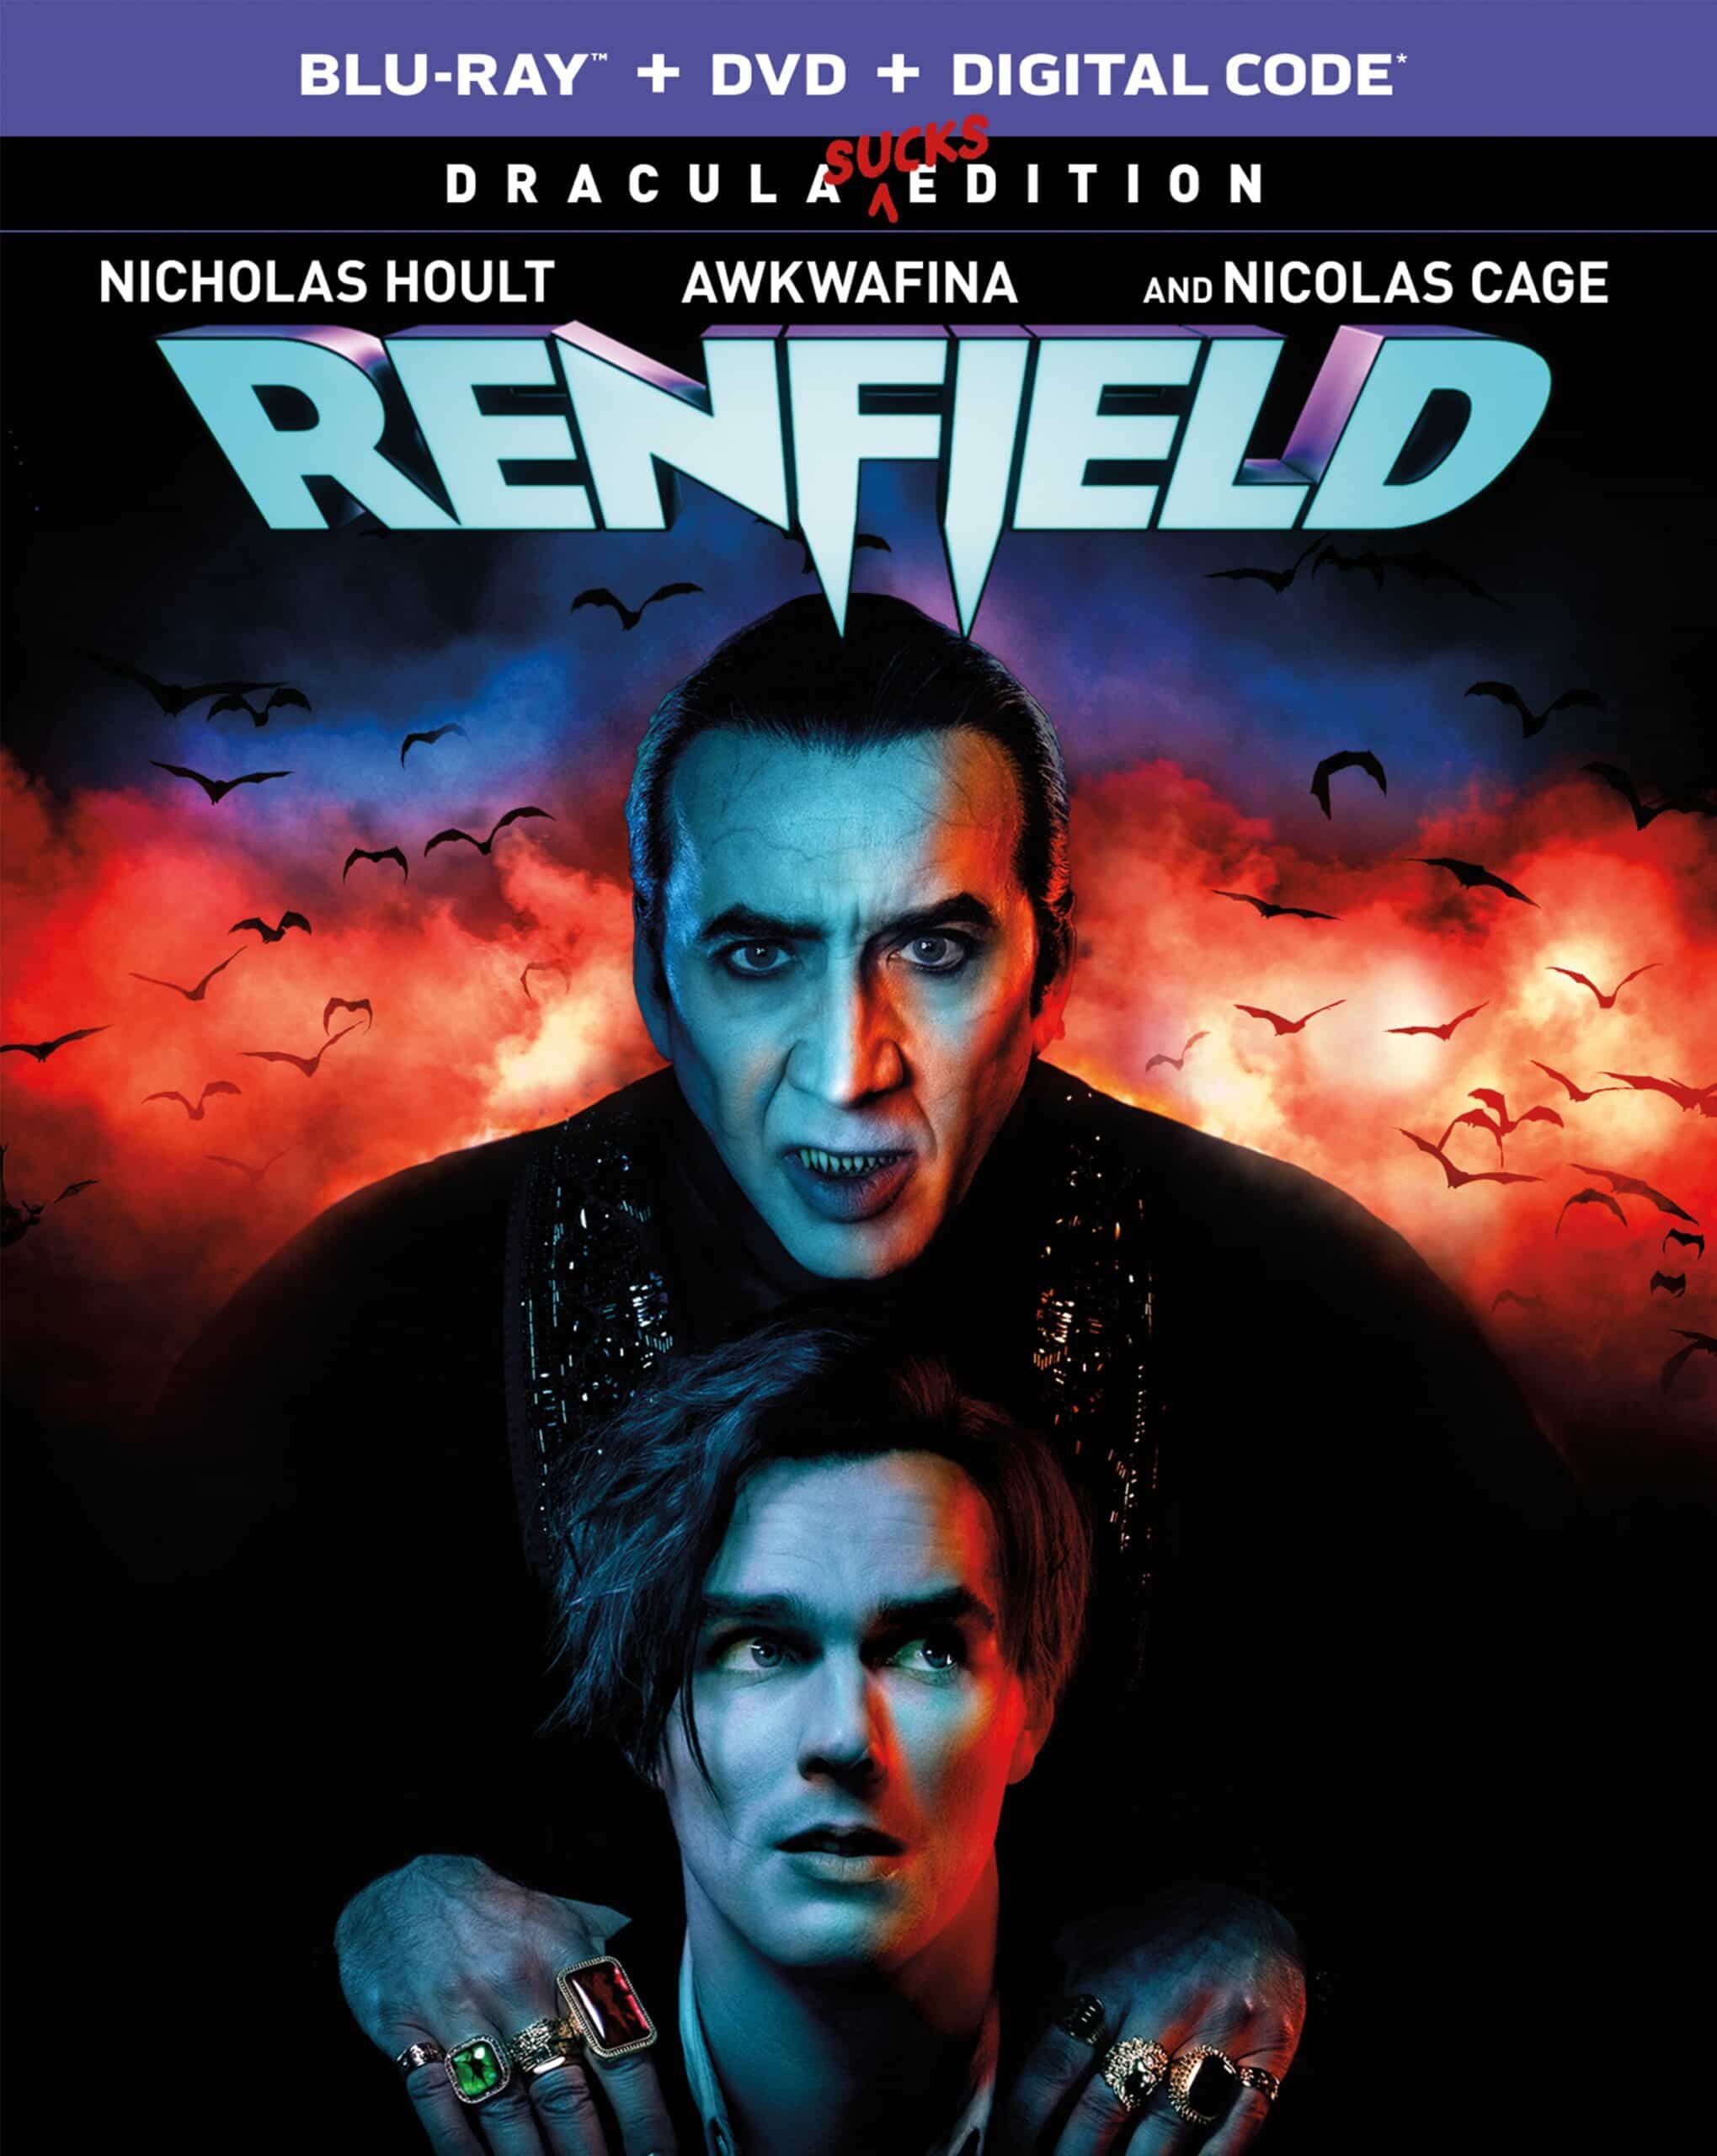 Get RENFIELD on Digital, Blu-ray™, and DVD Starting June 6 67